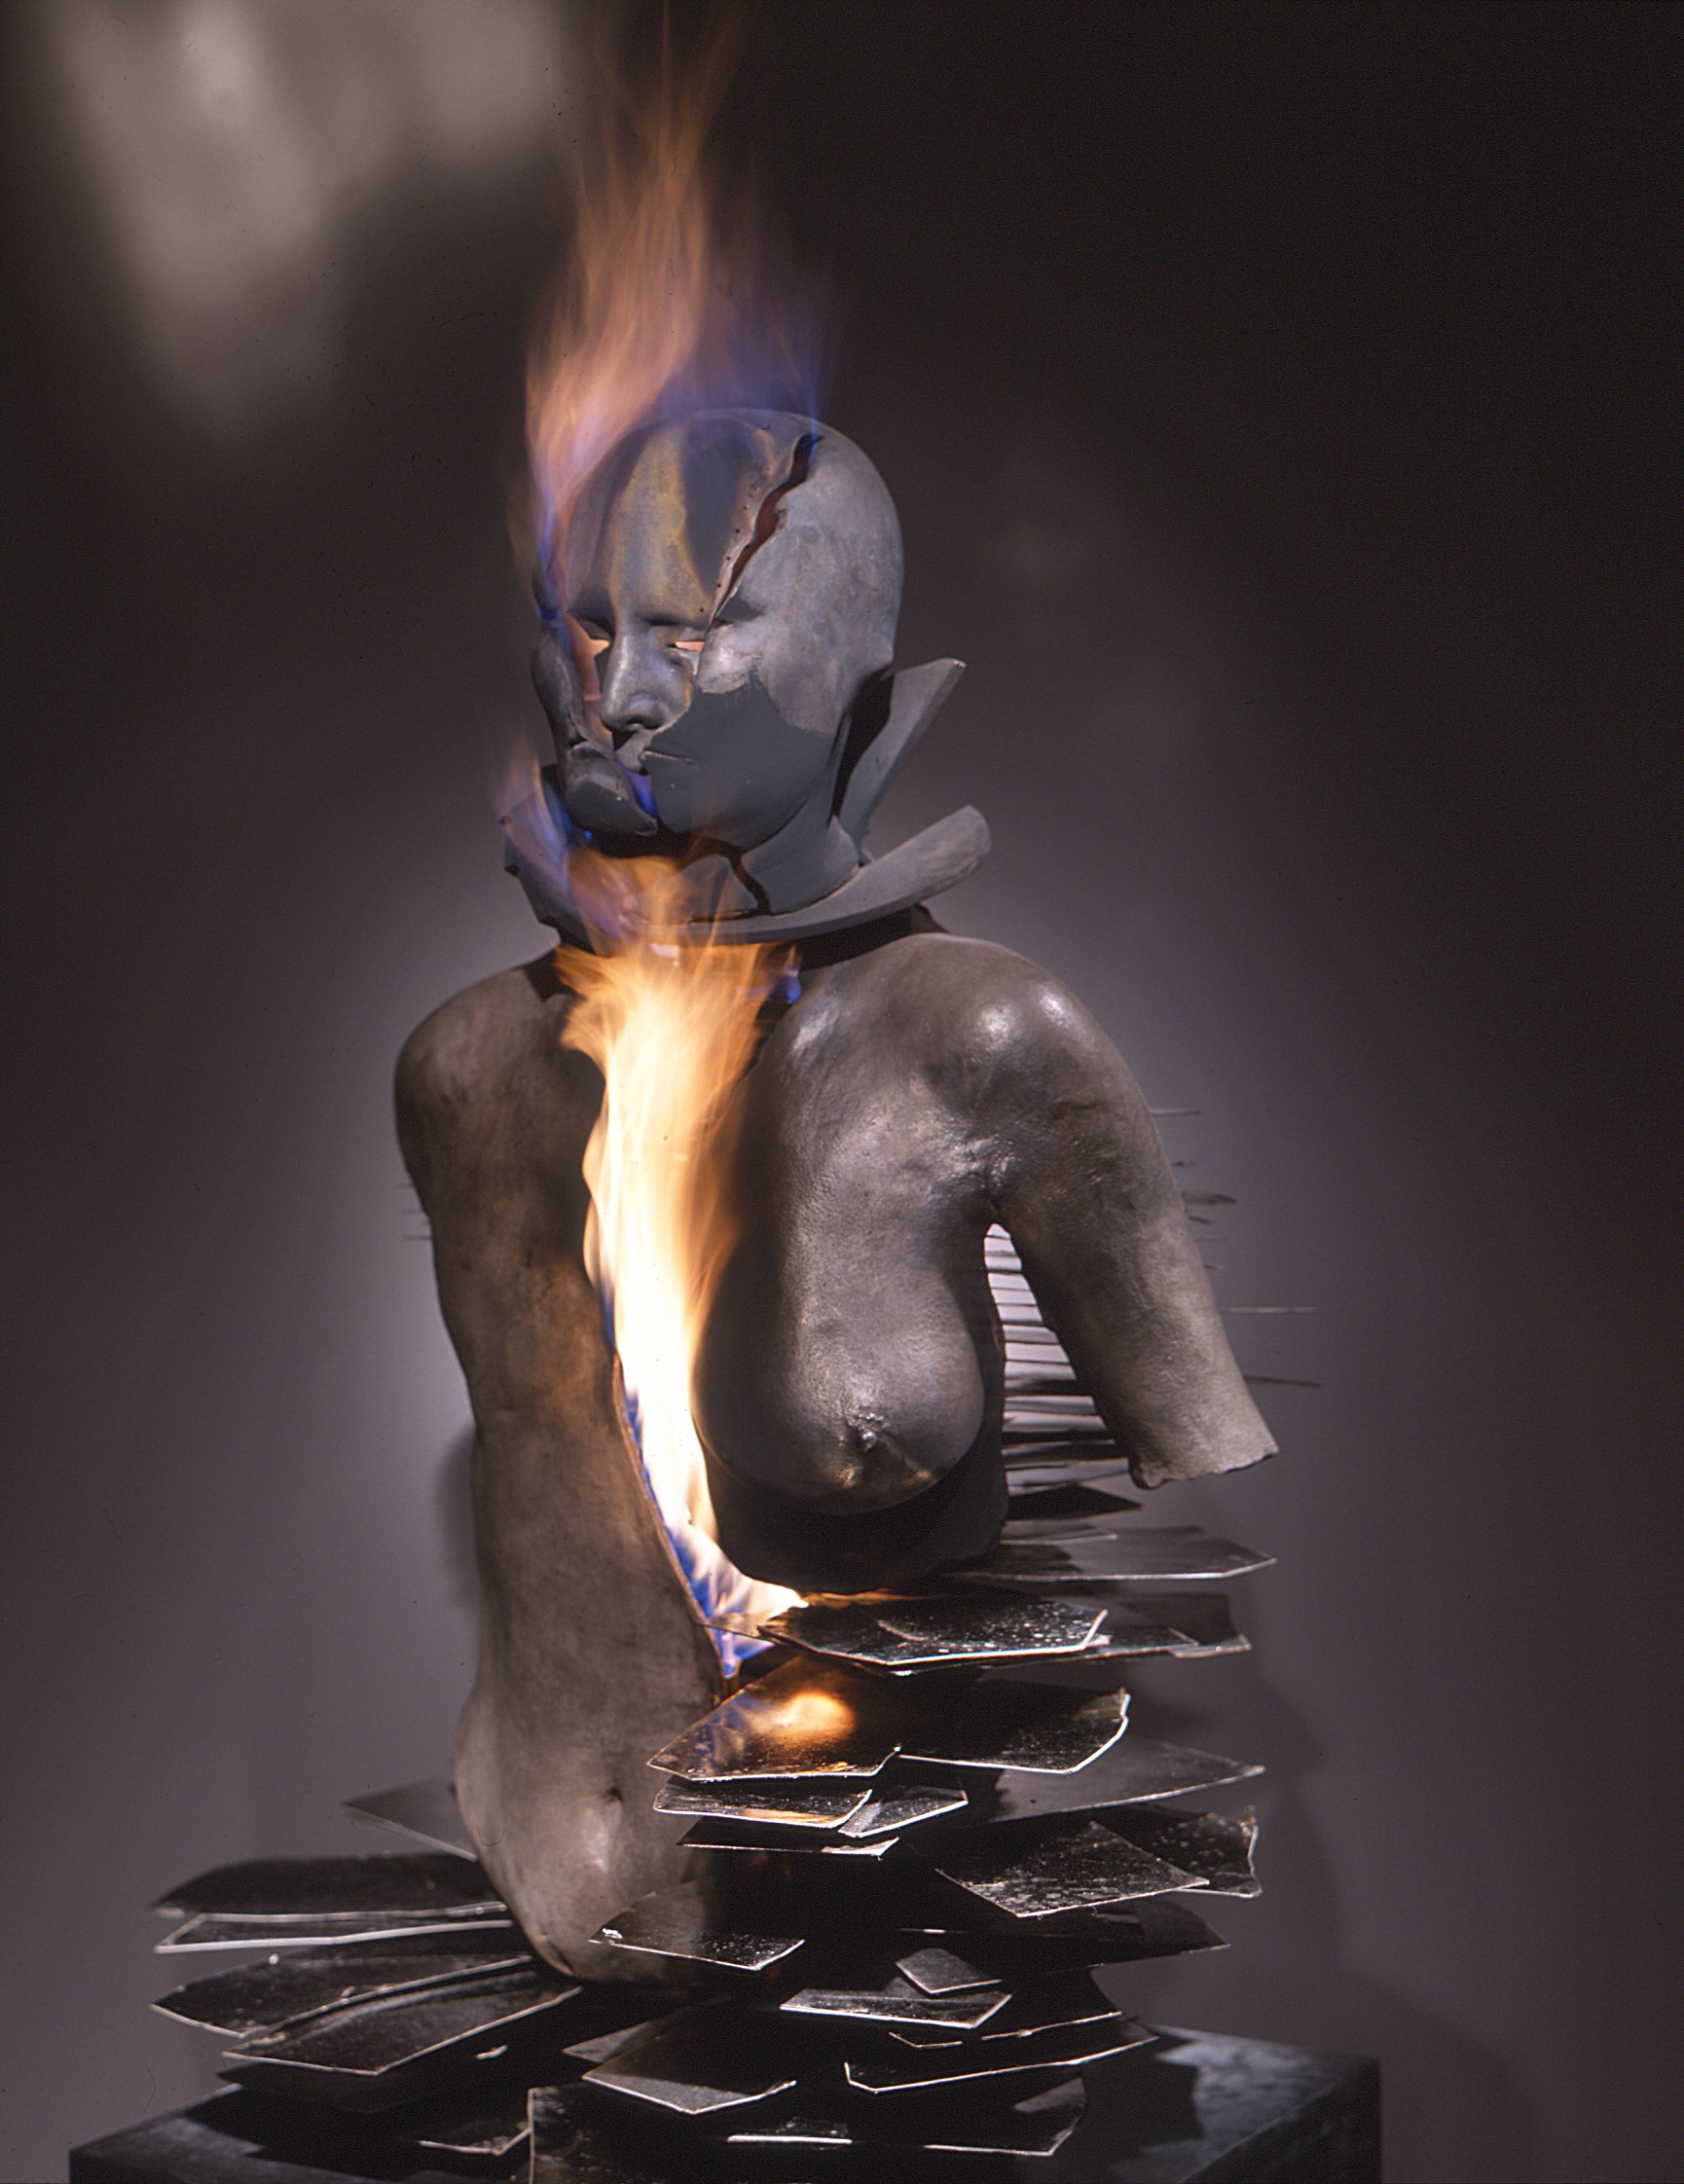 Liliane Lijn, Lilith, patinated bronze, phlogopite mica, gas, brass and stainless steel fittings, 186.5 x 55.5 x 60 cm (73 3/8 x 21 7/8 x 23 5/8 in), 2001